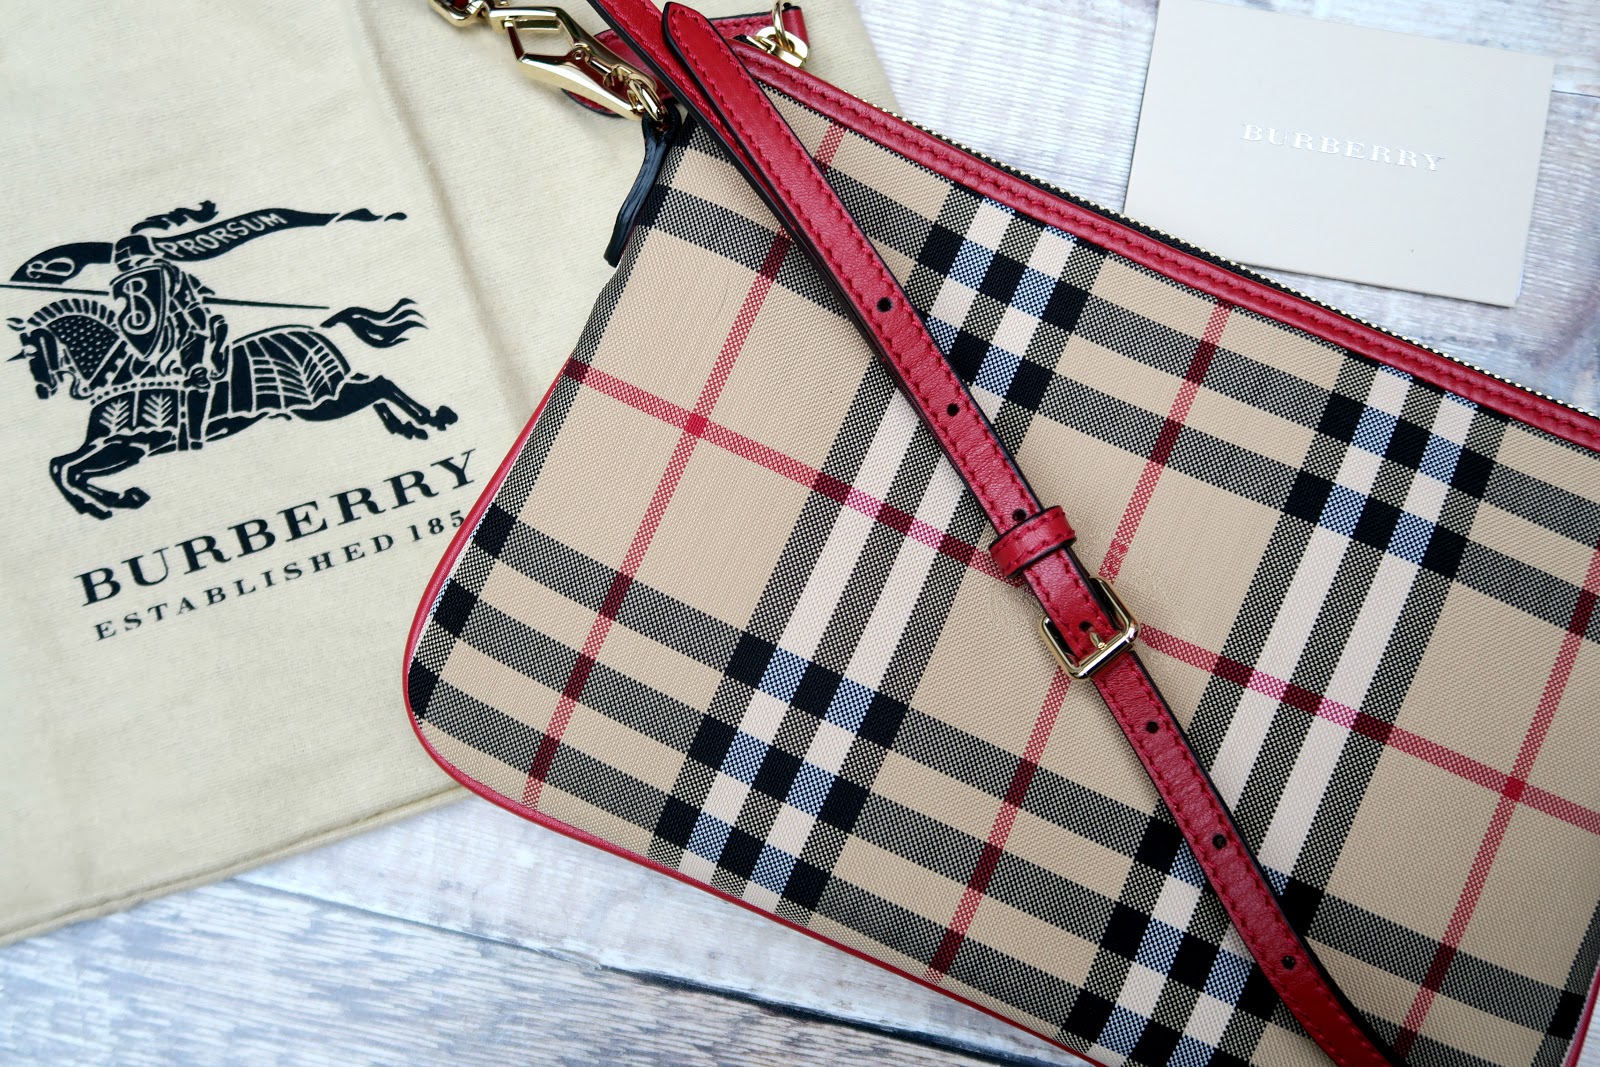 Exactly How Much Money I Saved At The Burberry Outlet | ALBOE by J